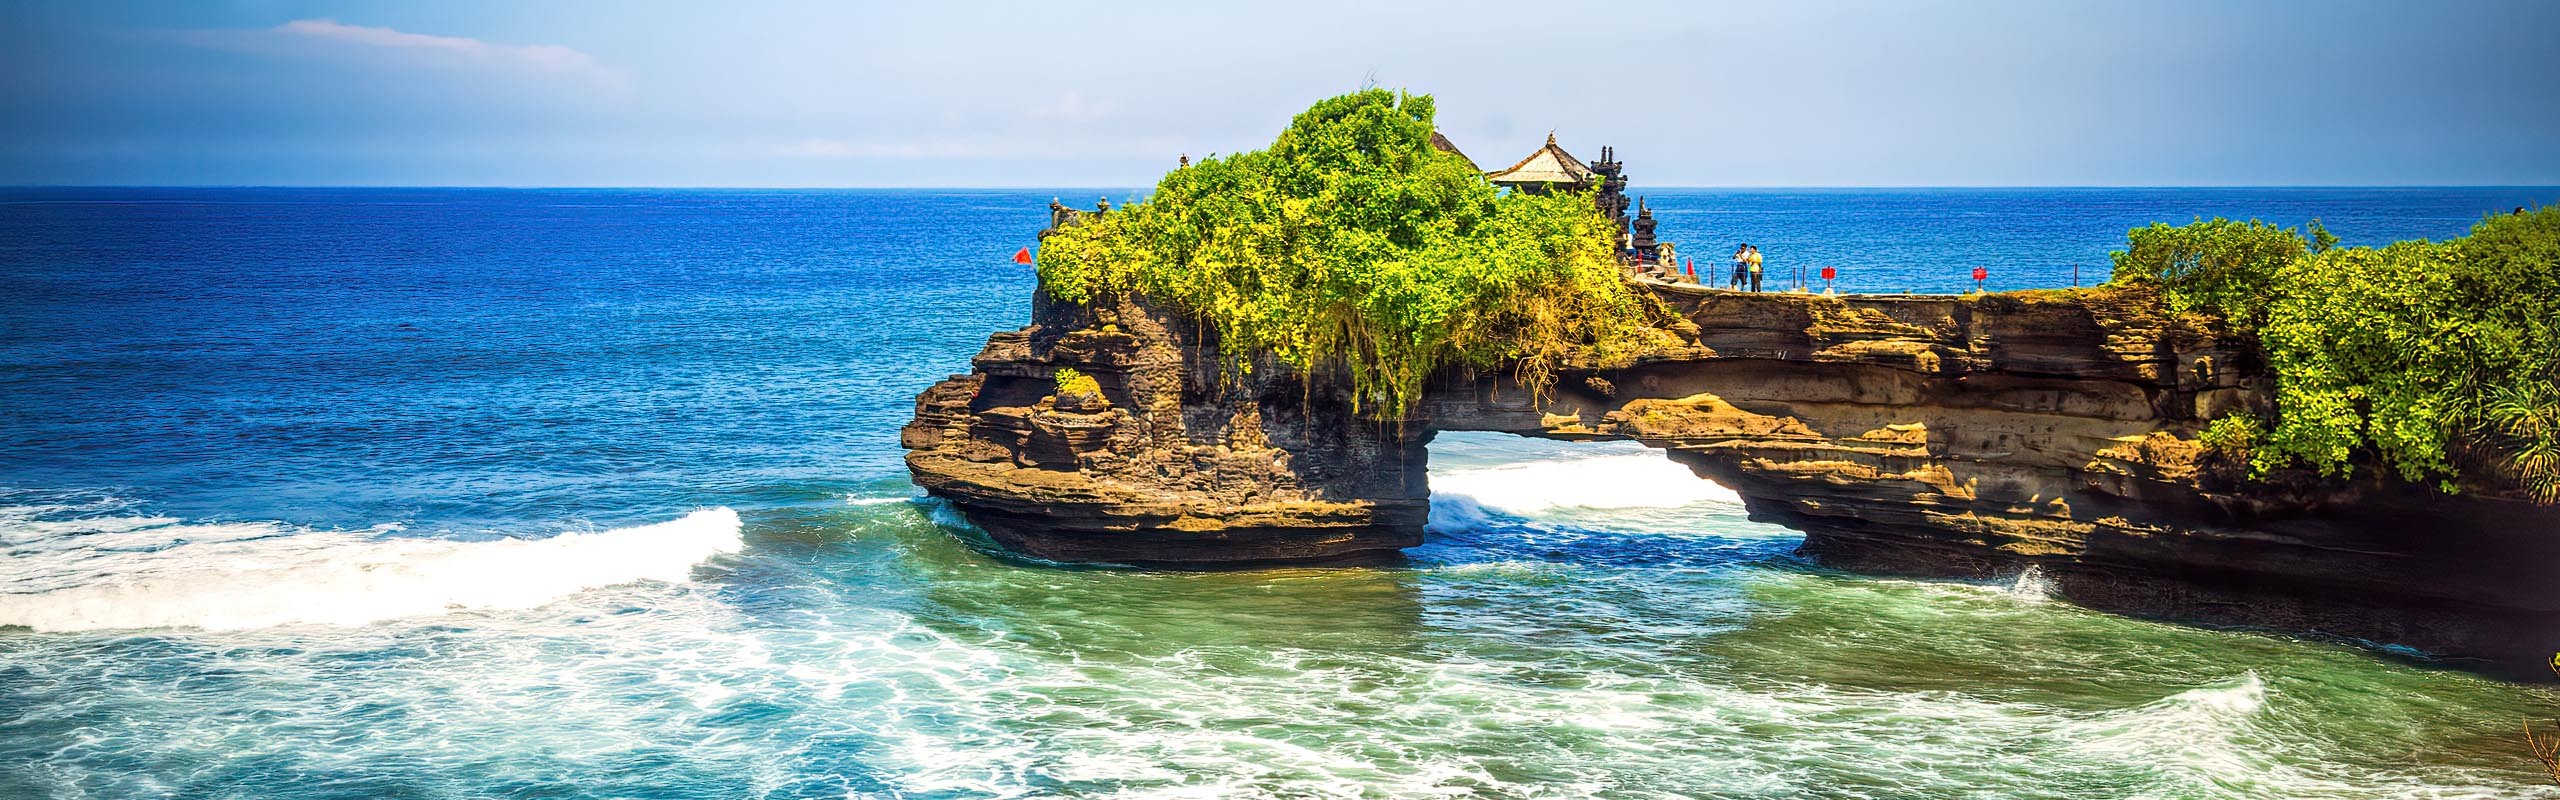 7-Day Private Bali Natural & Cultural Immersion